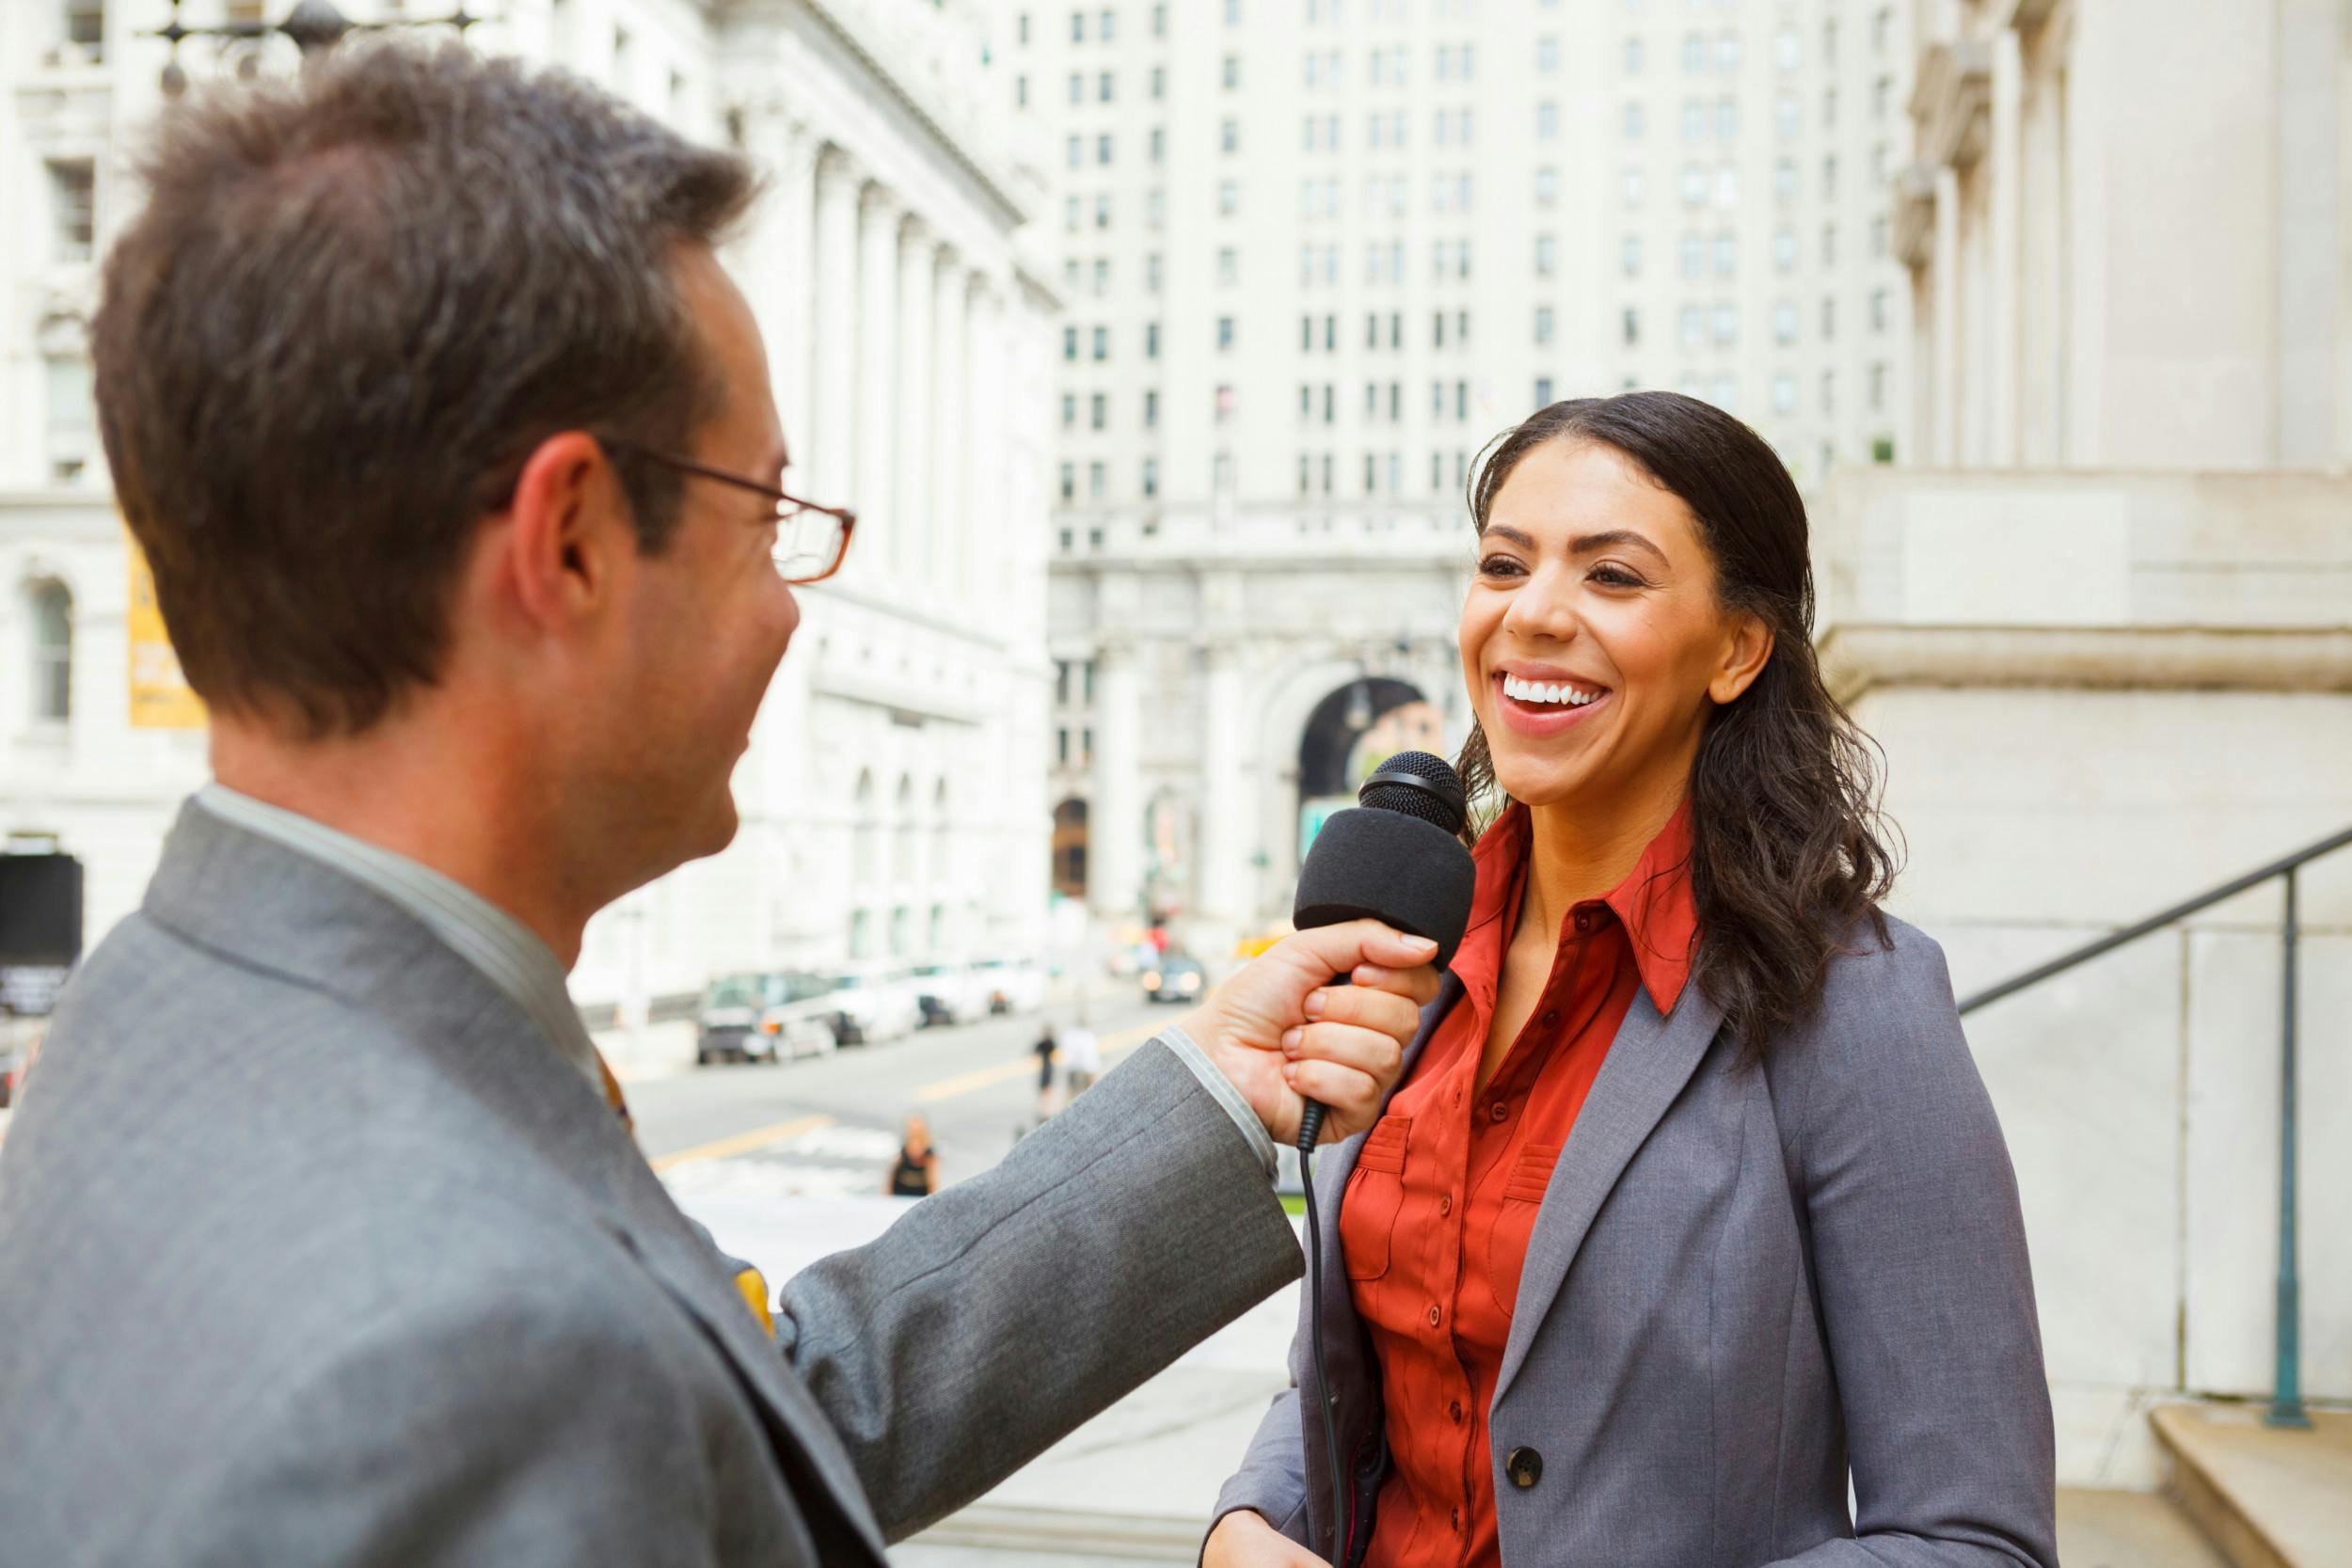 3 Key Takeaways From Media Training To Transform Your Next Interview